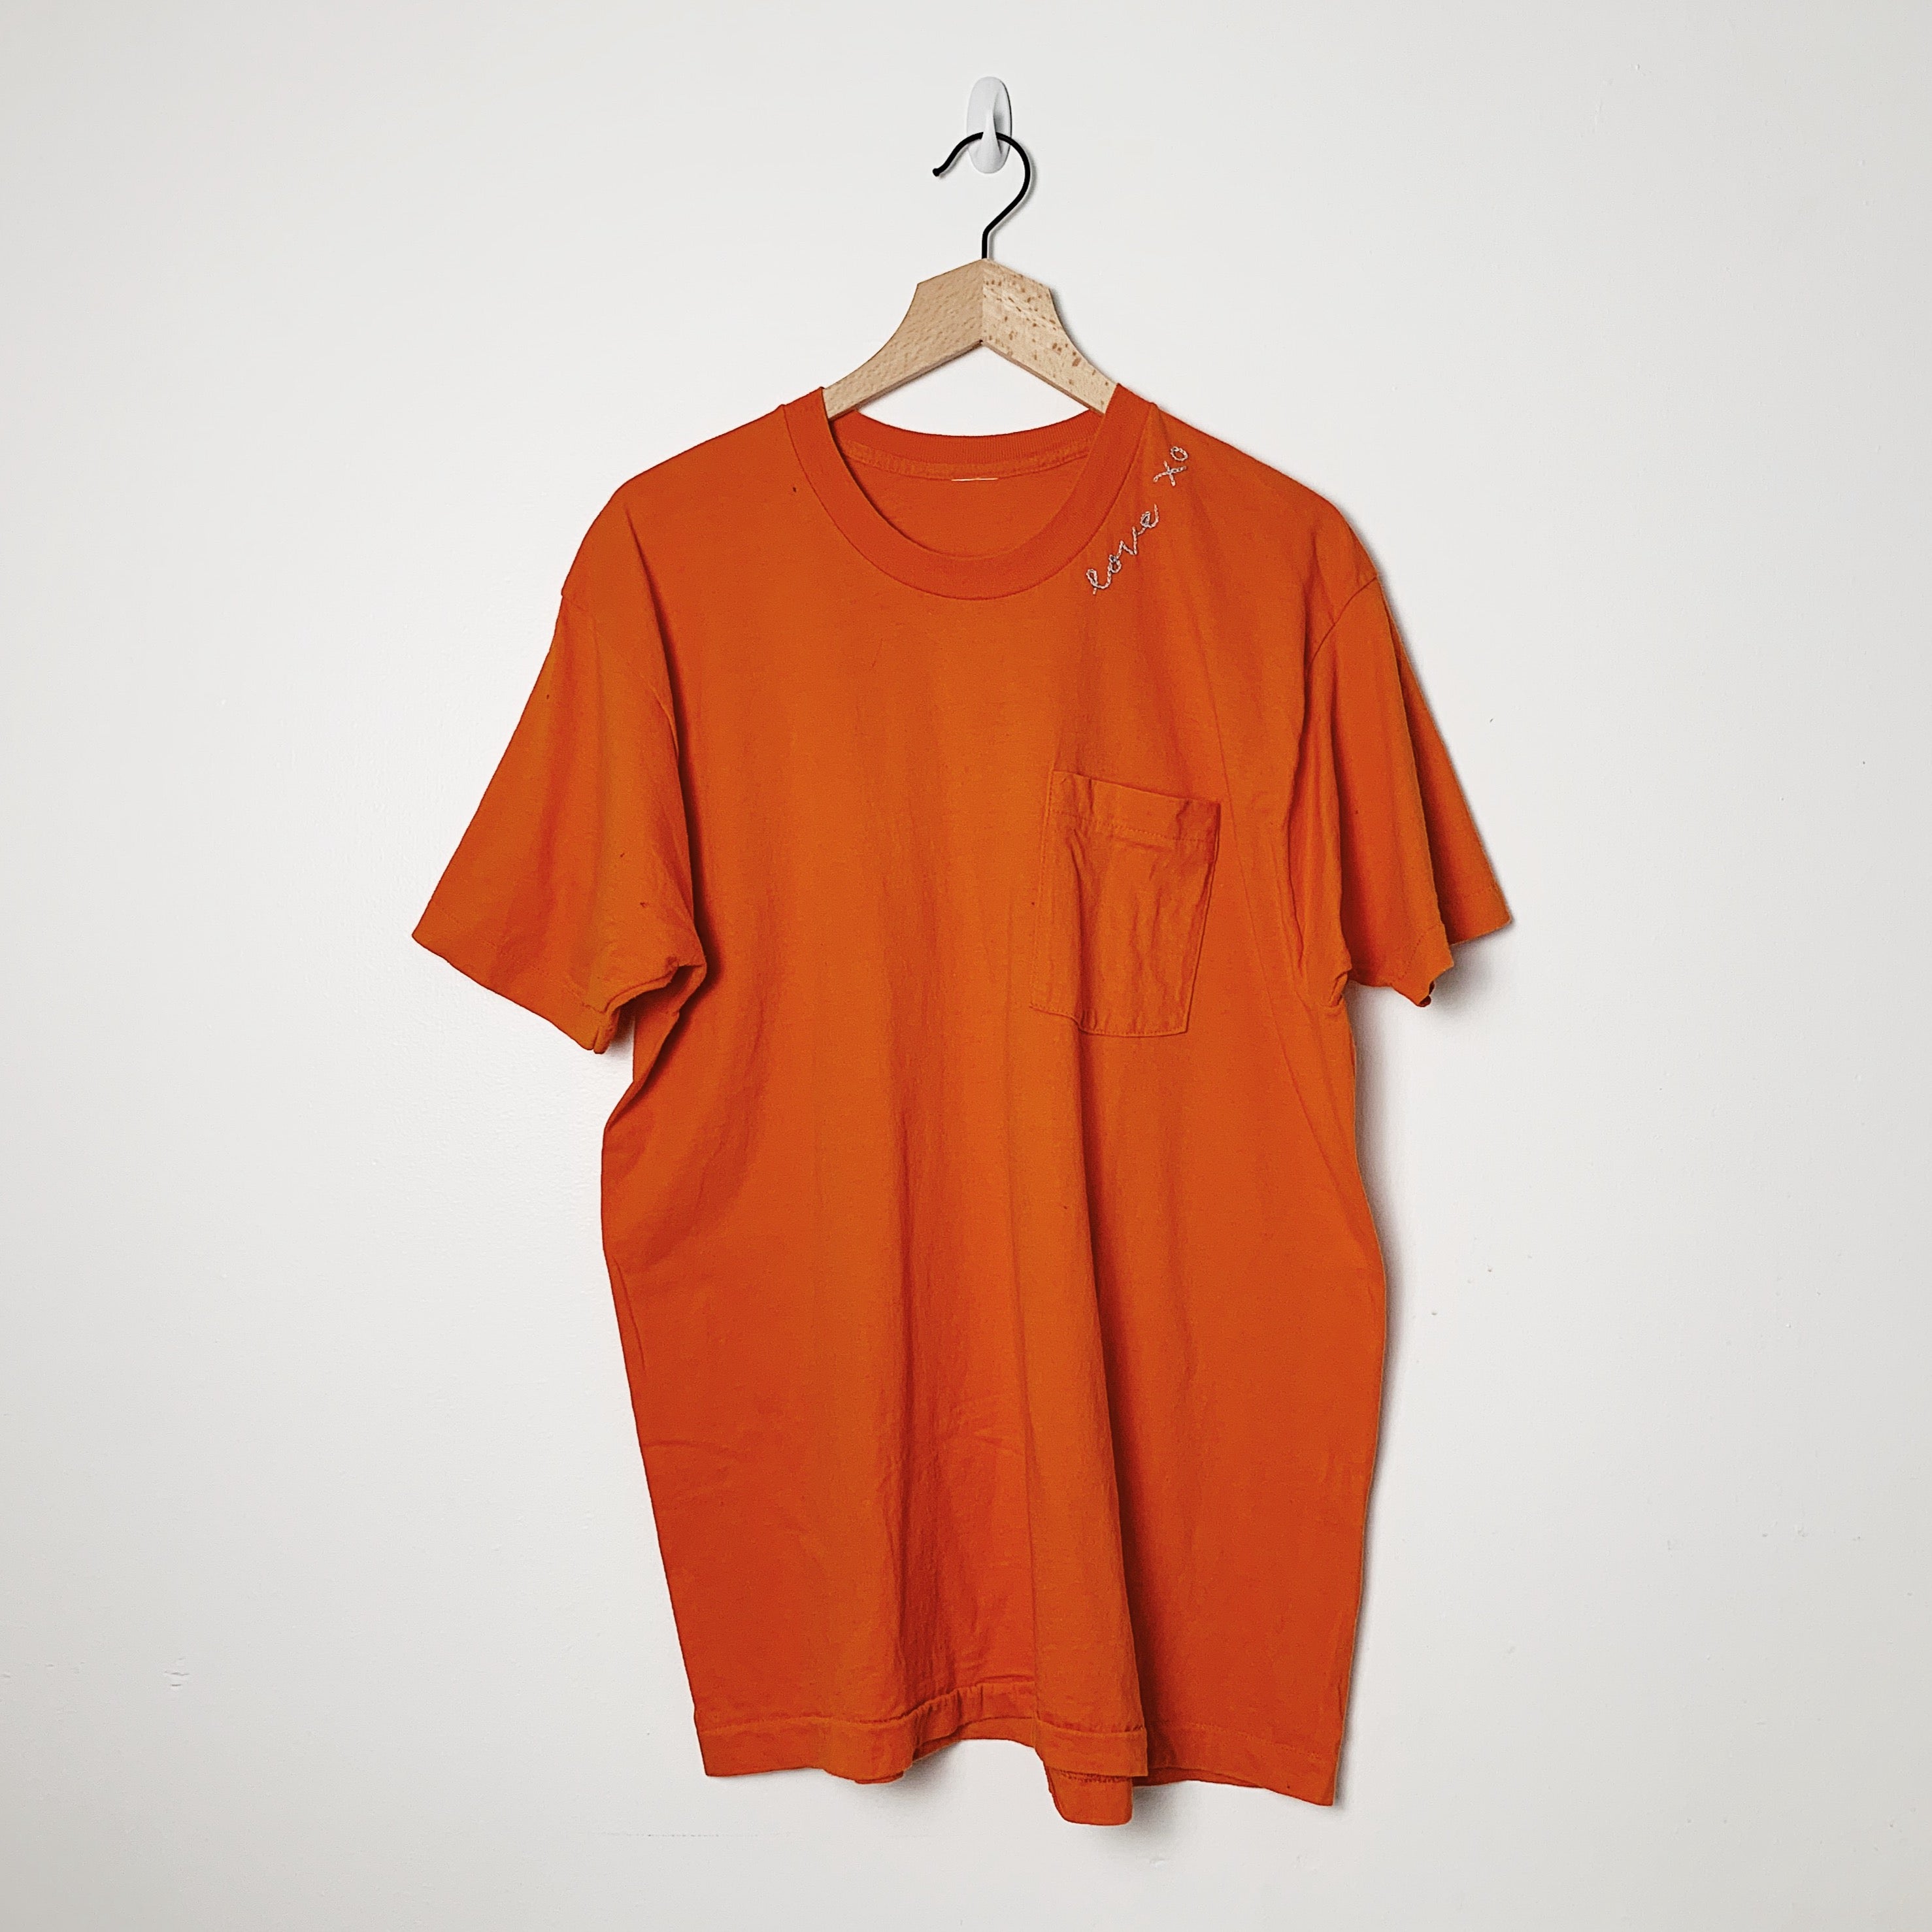 Vintage tee with hand embroidered Love XO graphic at neckline, orange color.